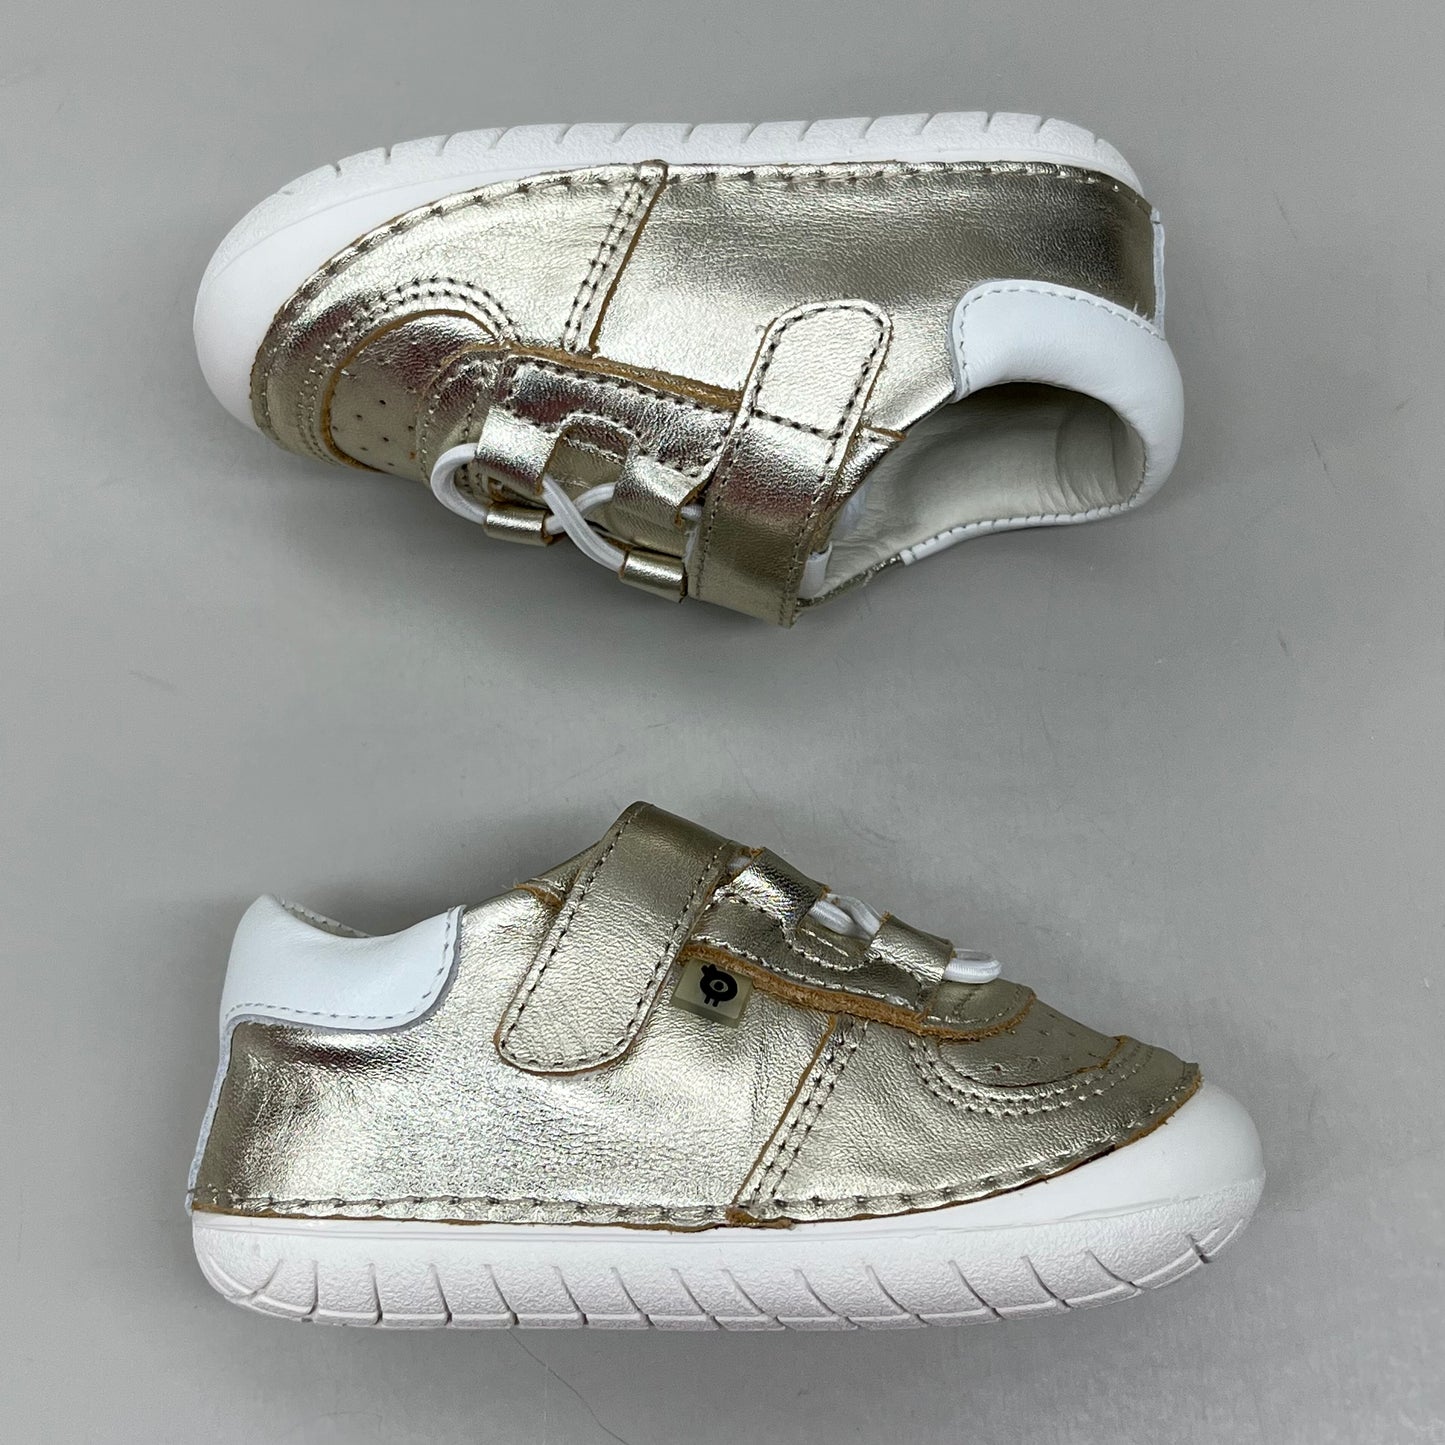 OLD SOLES Baby Rebel Pave Leather Shoe Sz 22 US 6 Gold/White #4090